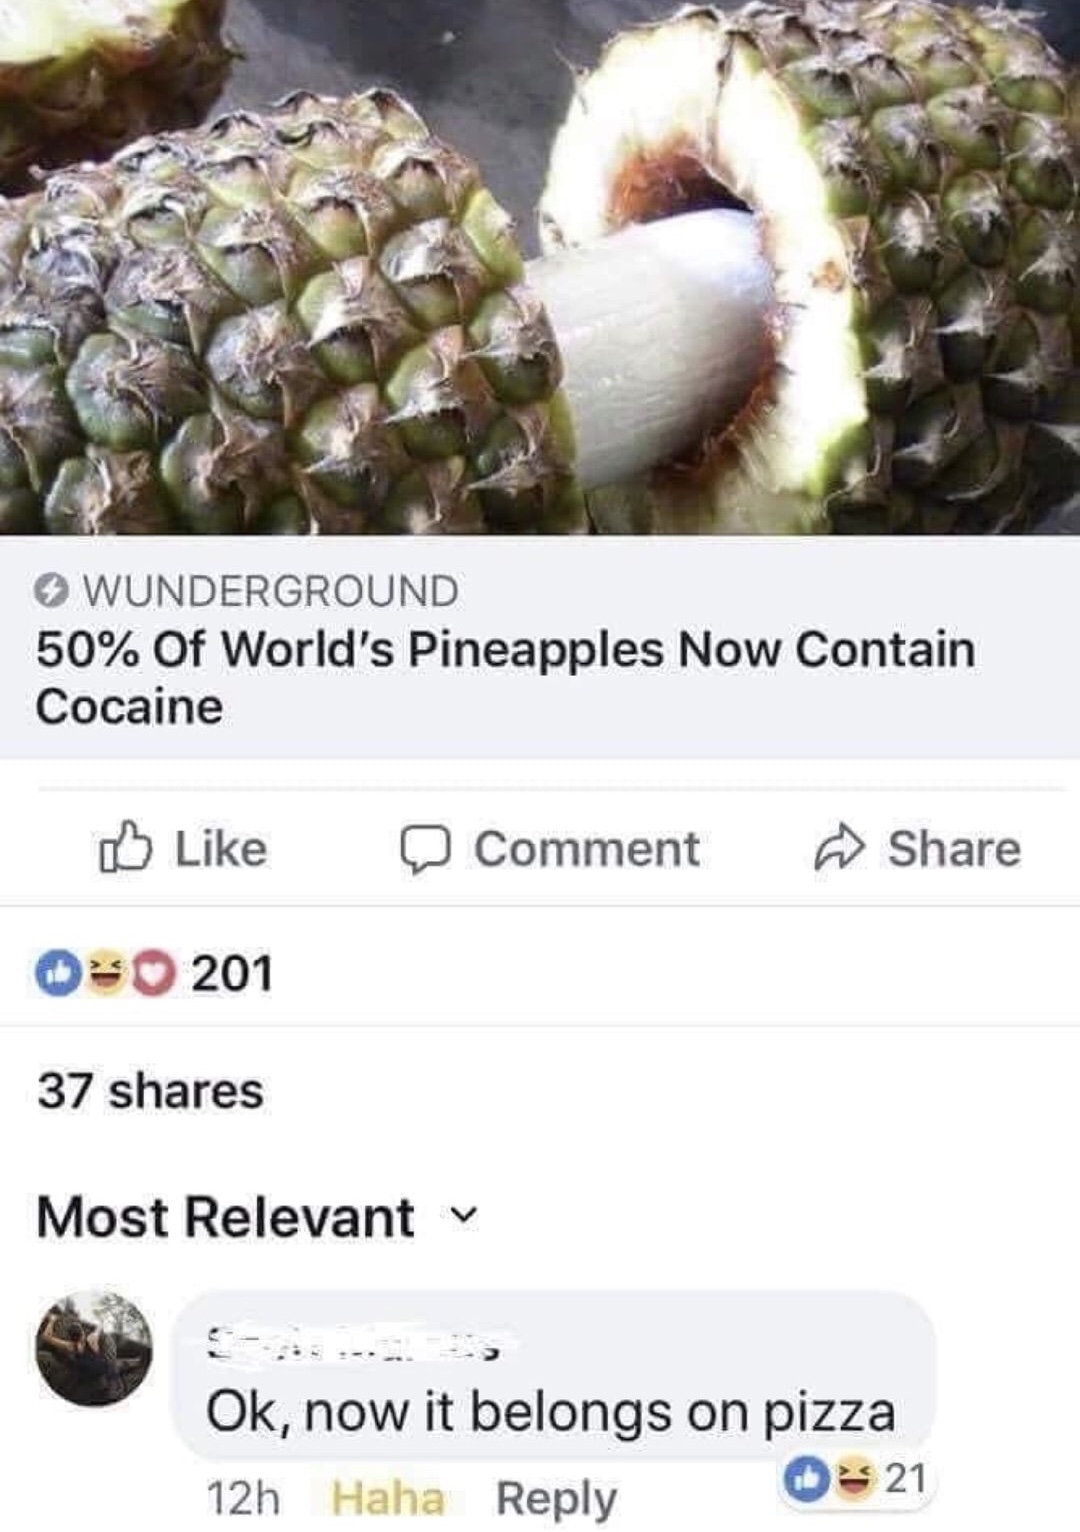 memes - cocaine pineapple - Wunderground 50% Of World's Pineapples Now Contain Cocaine Comment 00 201 37 Most Relevant Ok, now it belongs on pizza 12h Haha 21